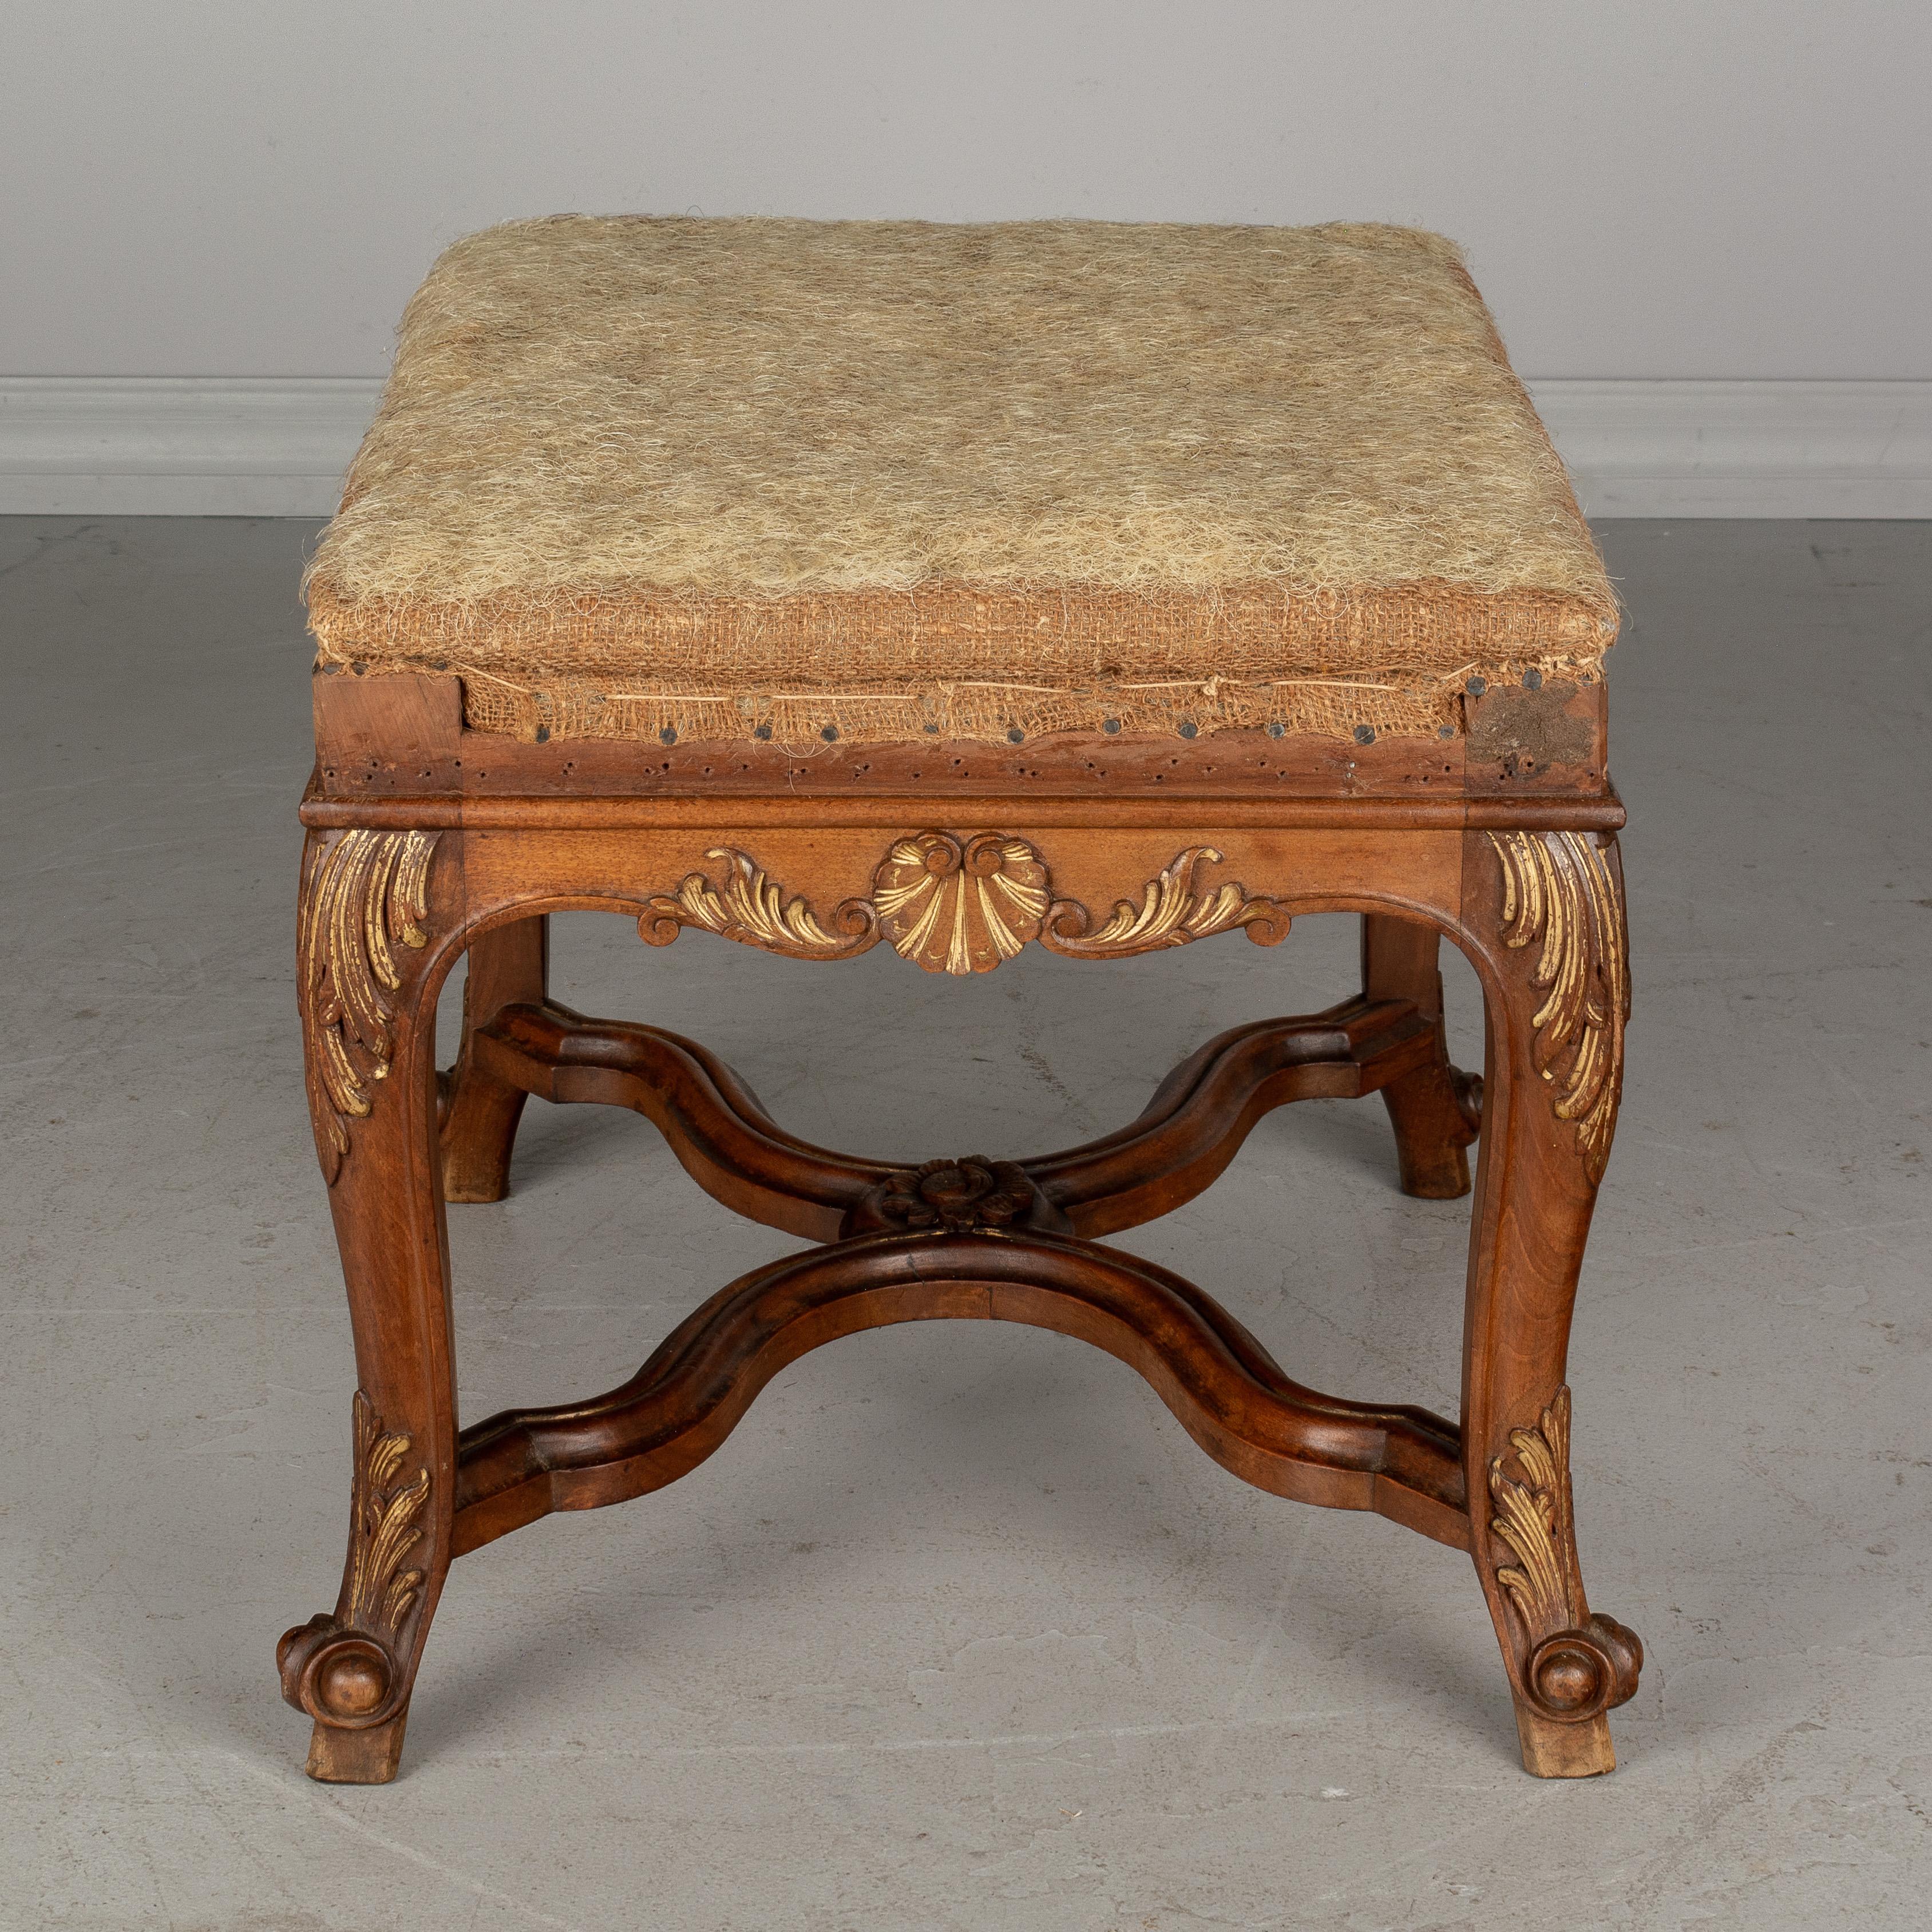 French Louis XV Style Foot Stool or Bench (Handgefertigt)